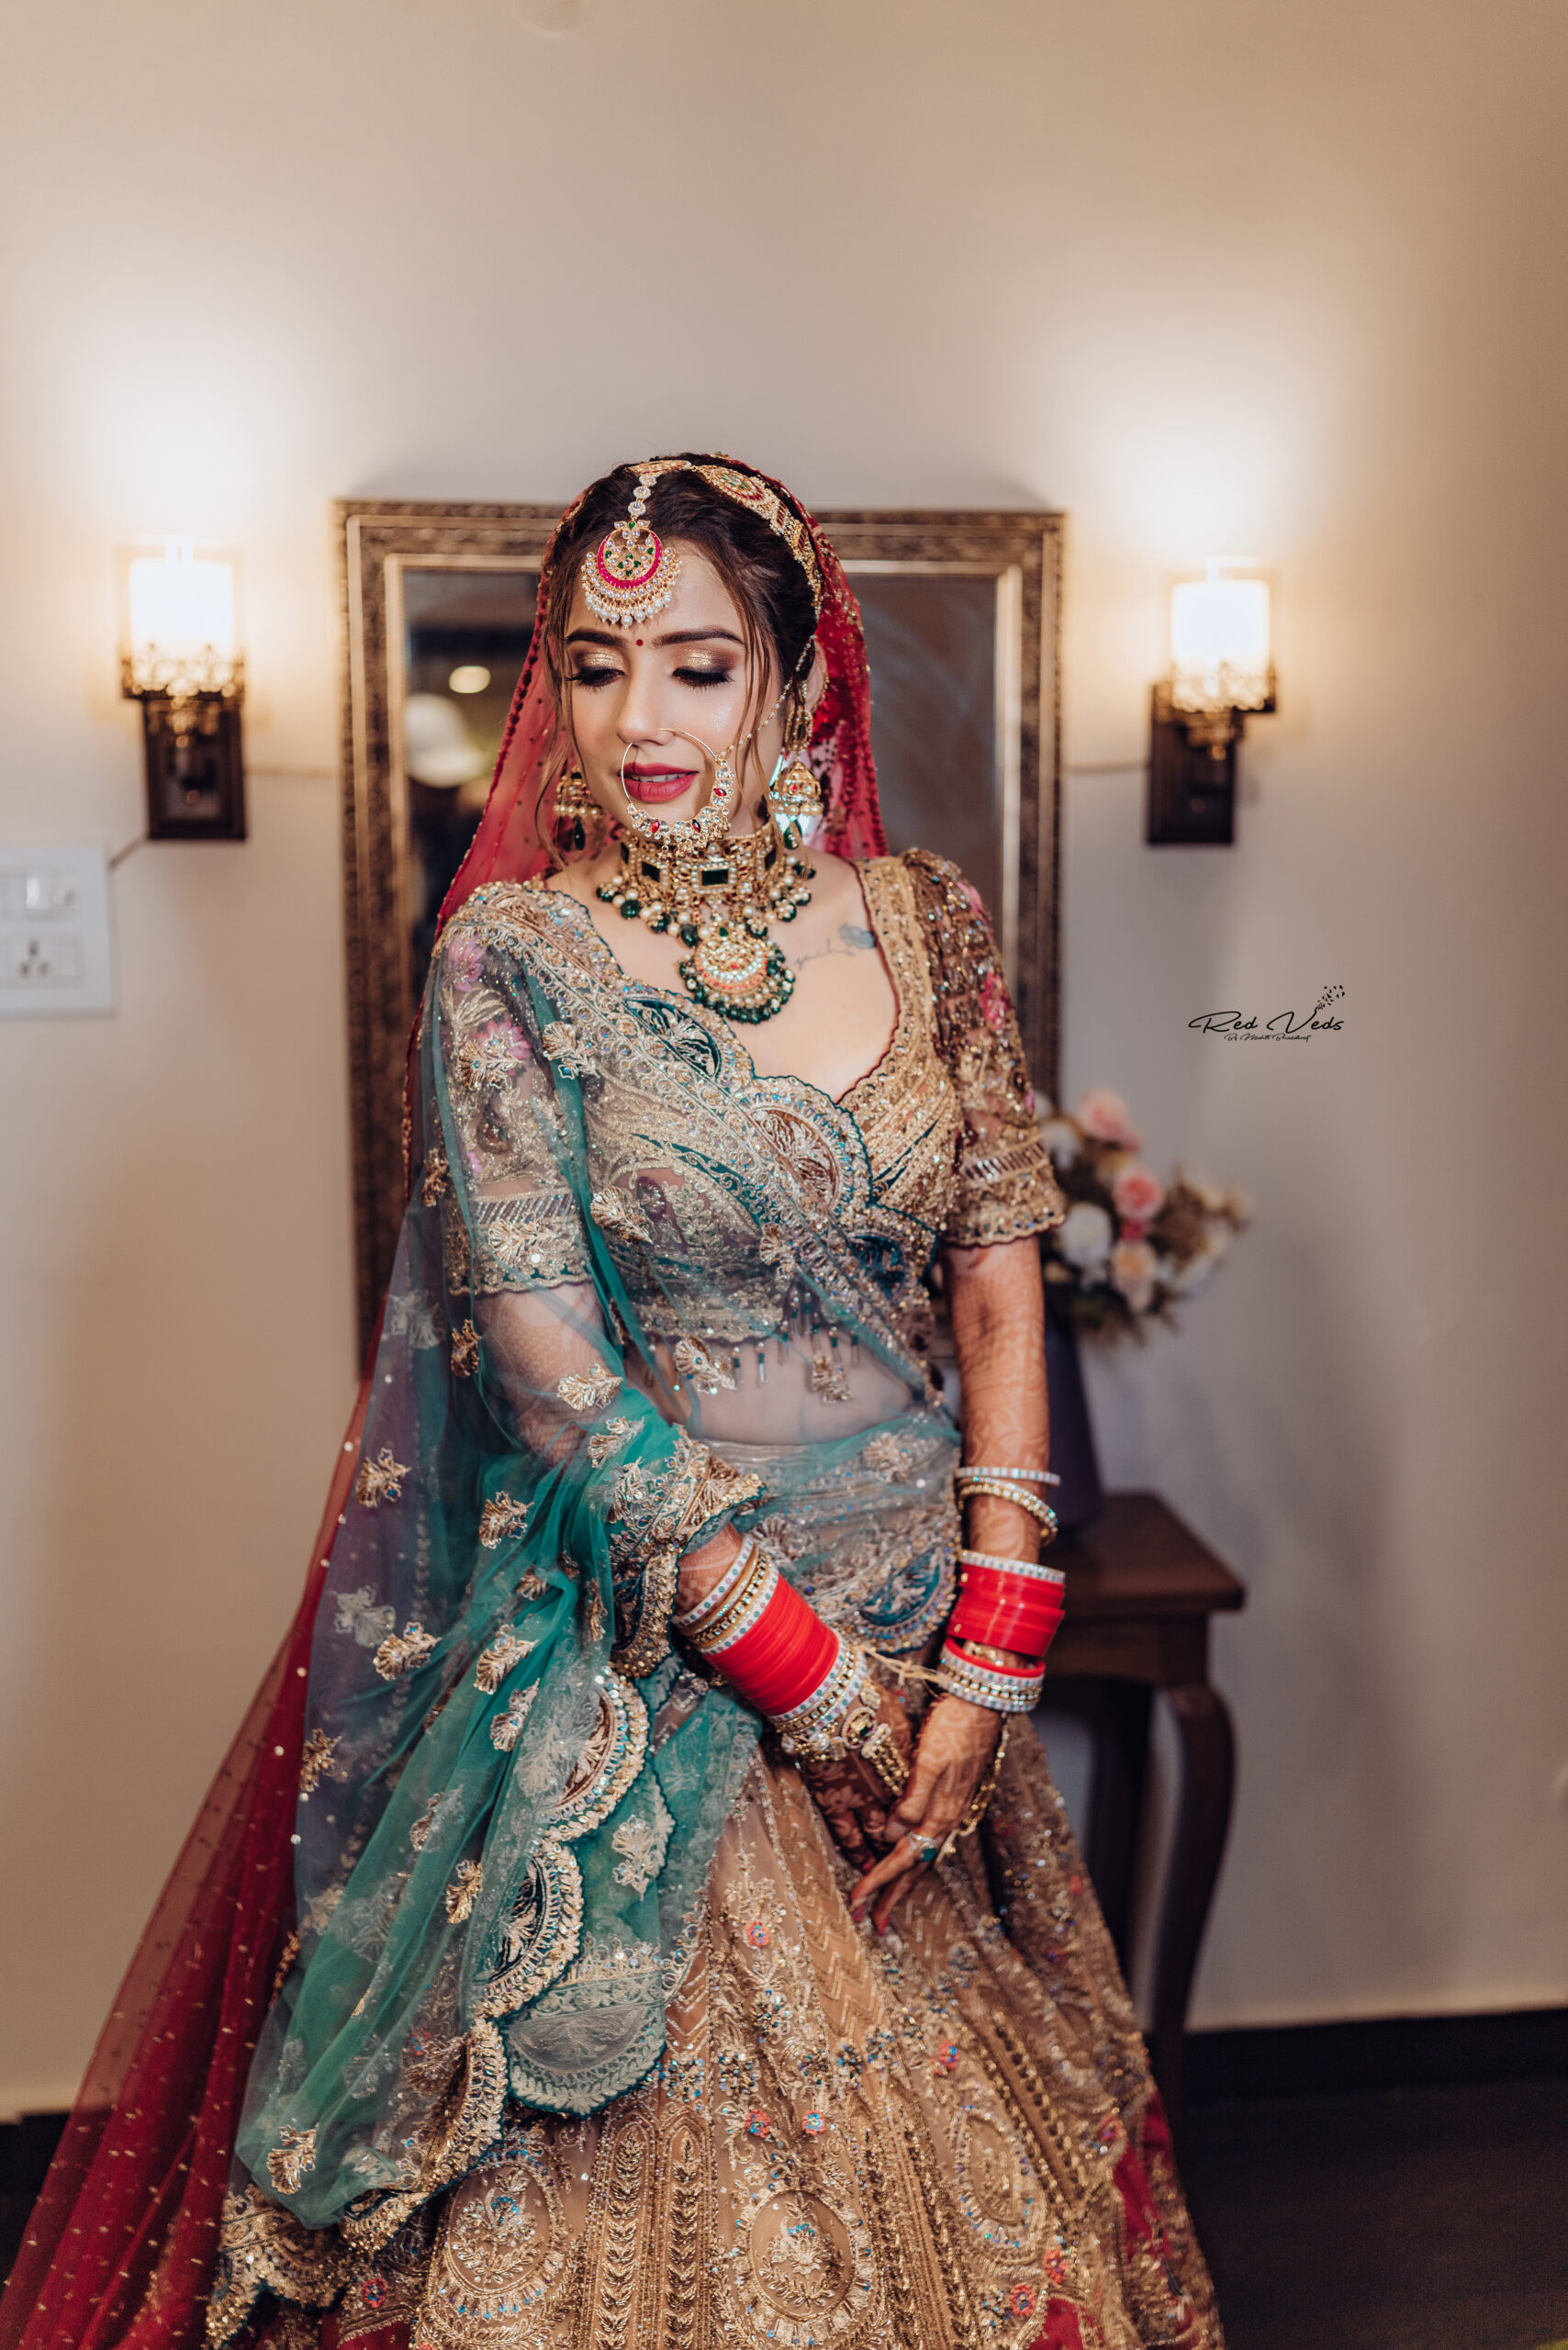 Wedding Wednesday: Jagy | A New Orleans Indian Bride — Verde Beauty